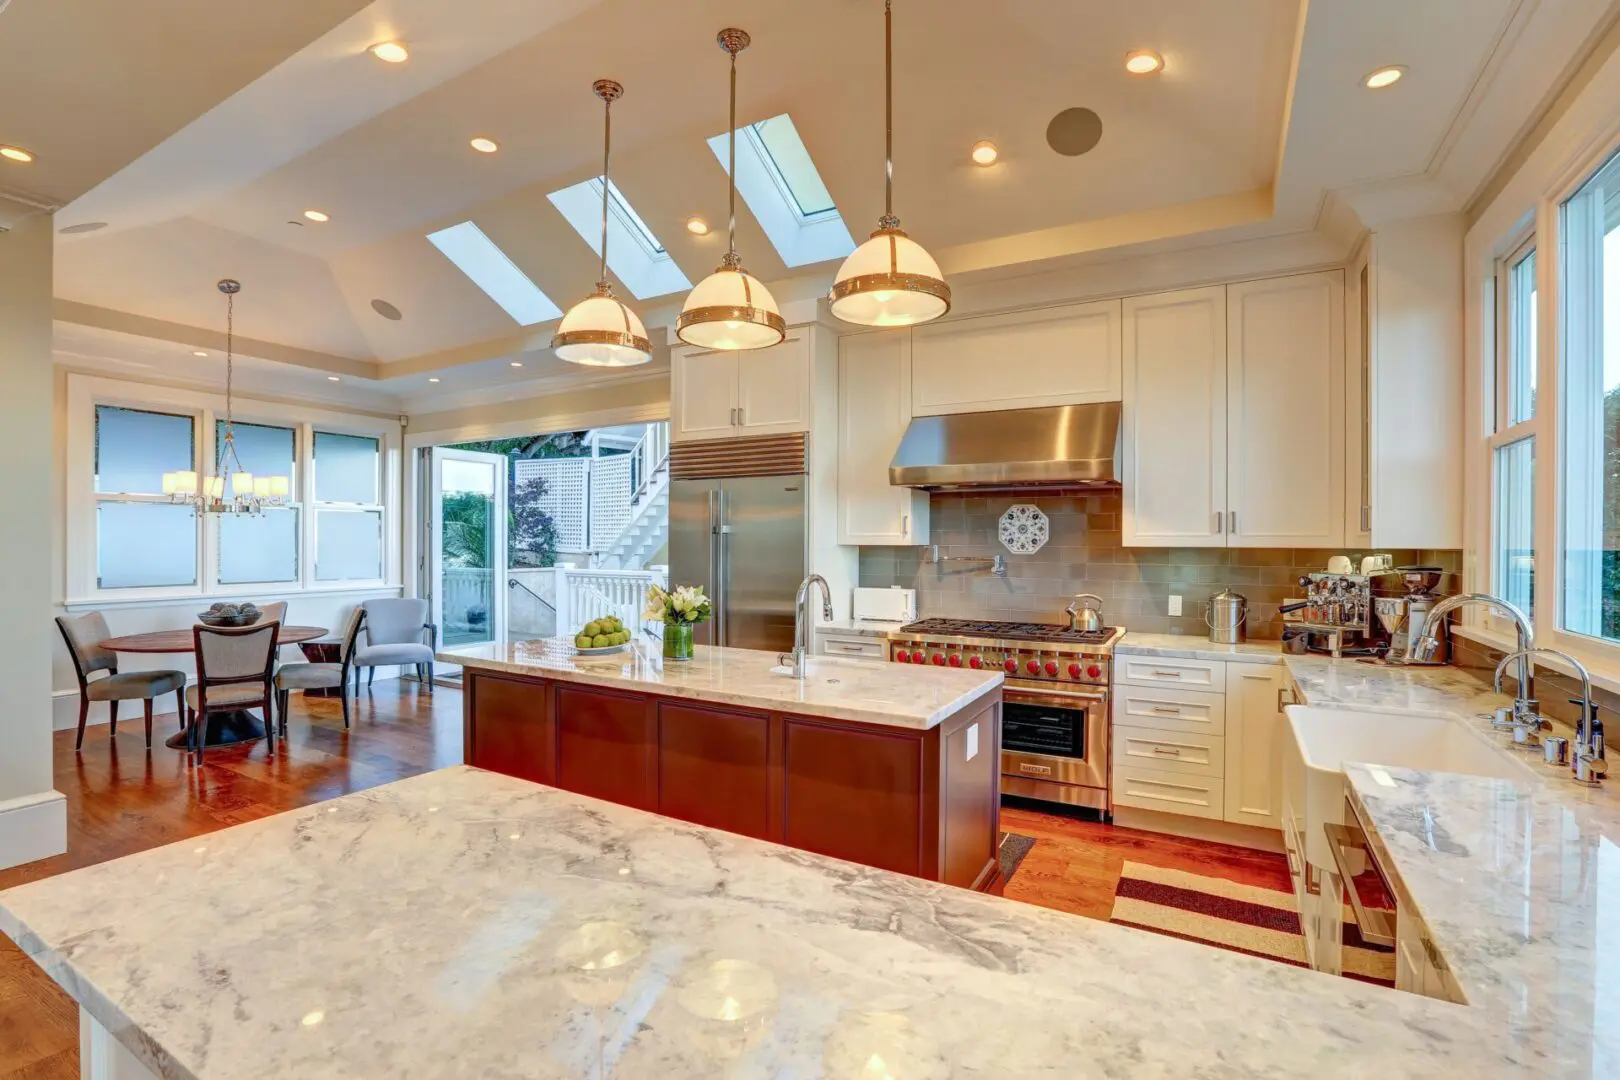 A kitchen with a large island and lots of counter space.